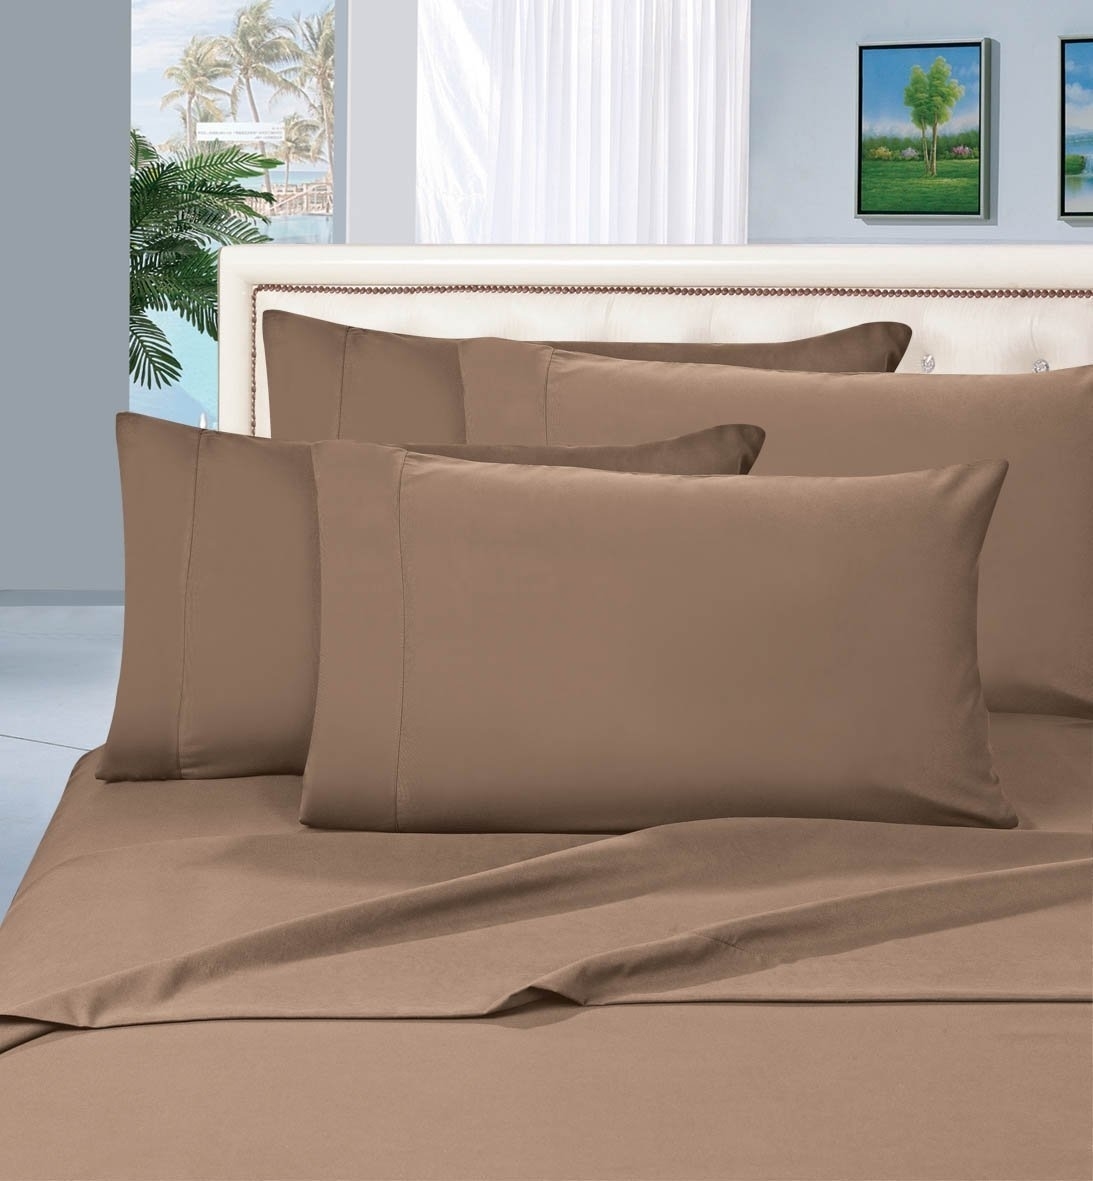 Elegant Comfort 1500 Series Wrinkle Resistant Egyptian Quality Hypoallergenic Ultra Soft Luxury 3-piece Bed Sheet Set, Twin, Taupe